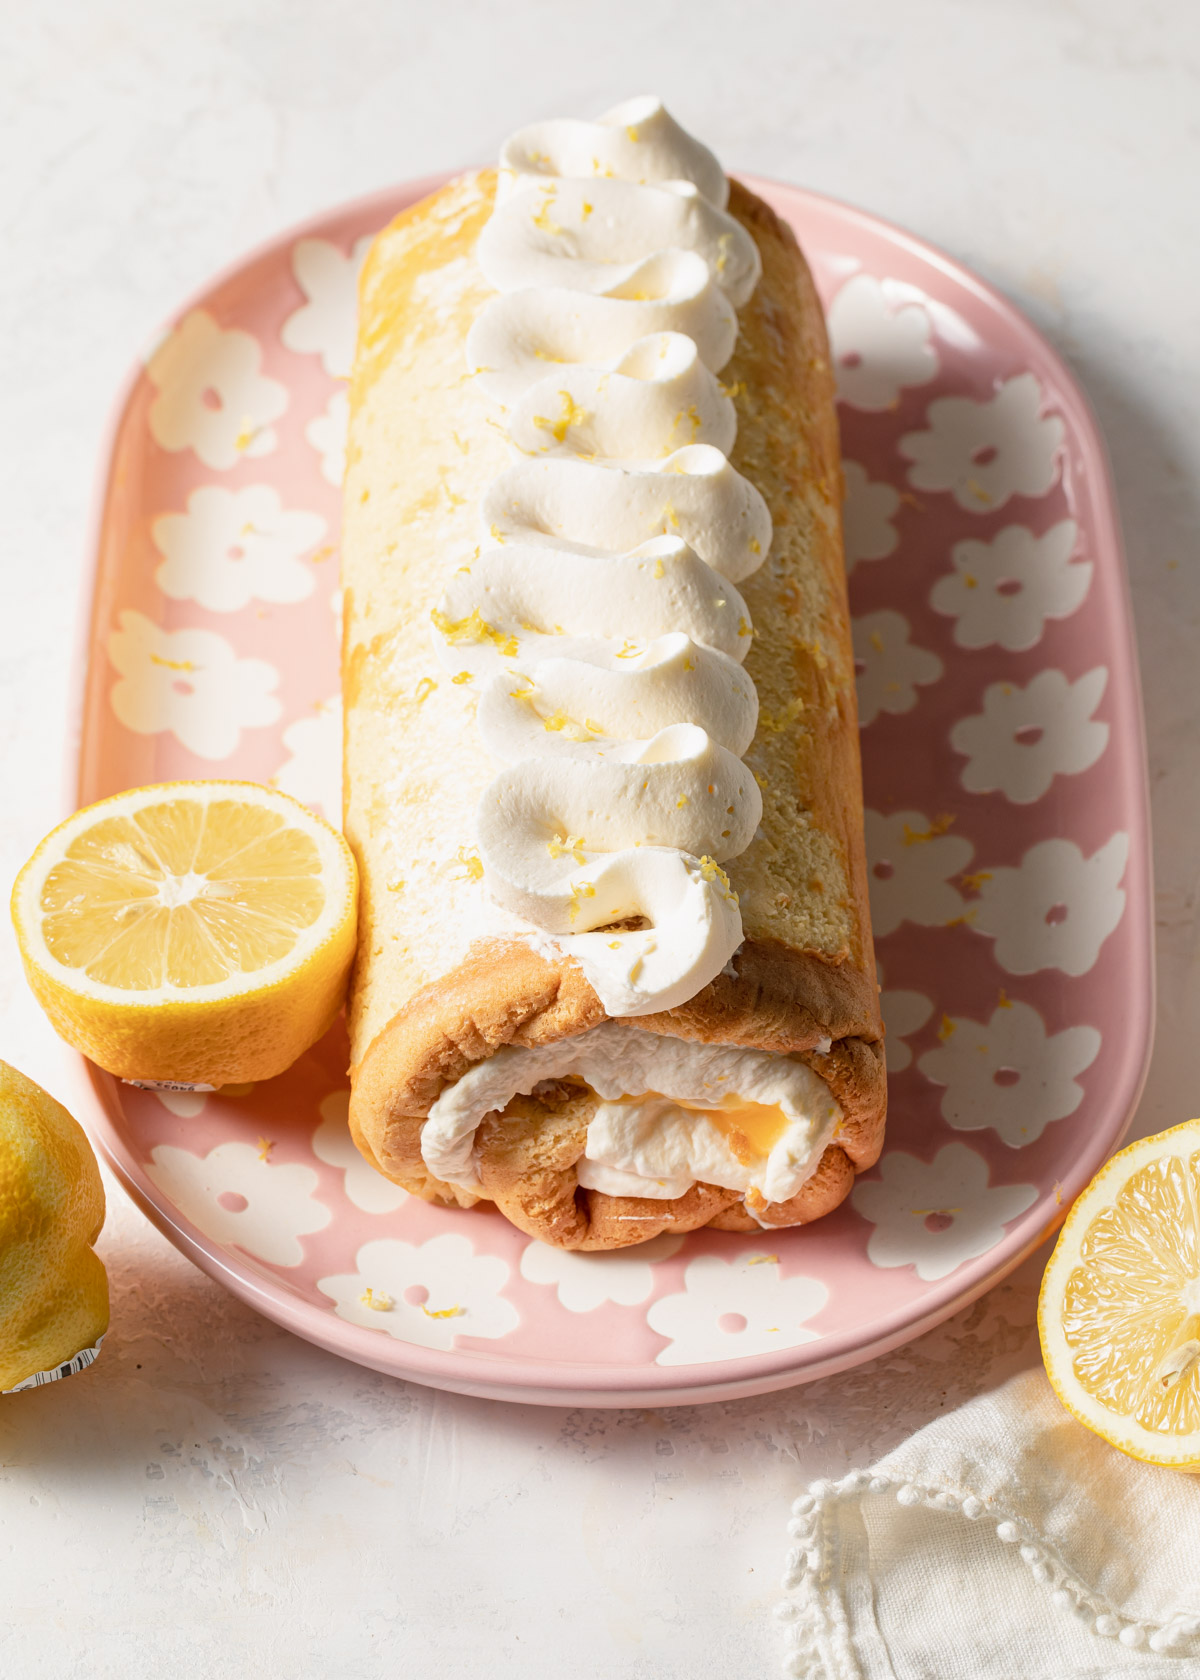 Piped whipped cream on top of a lemon roll cake